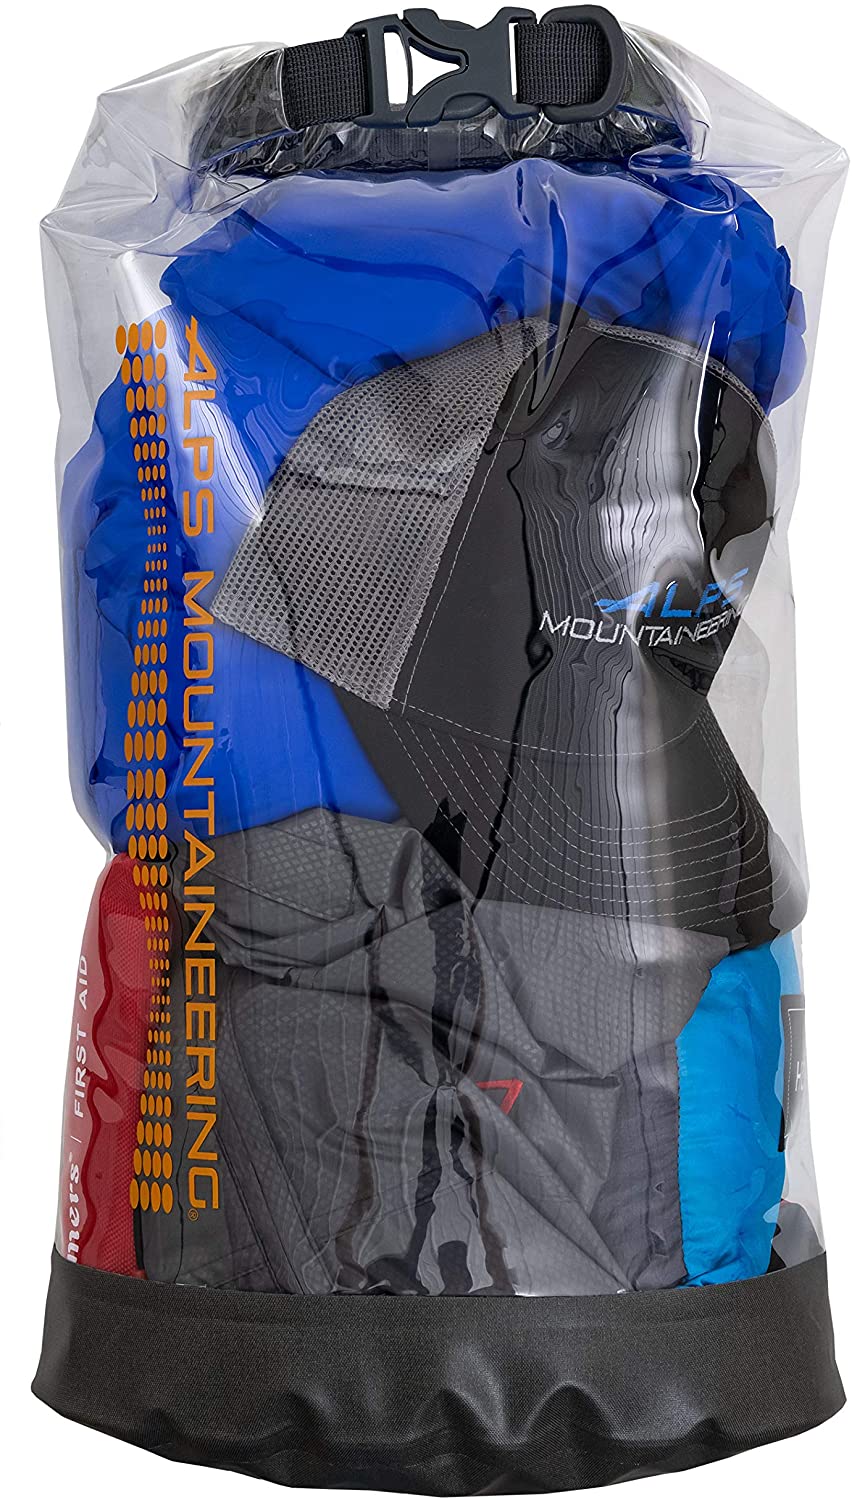 ALPS Mountaineering Clear Passage Dry Bag, 35L - AL7464000